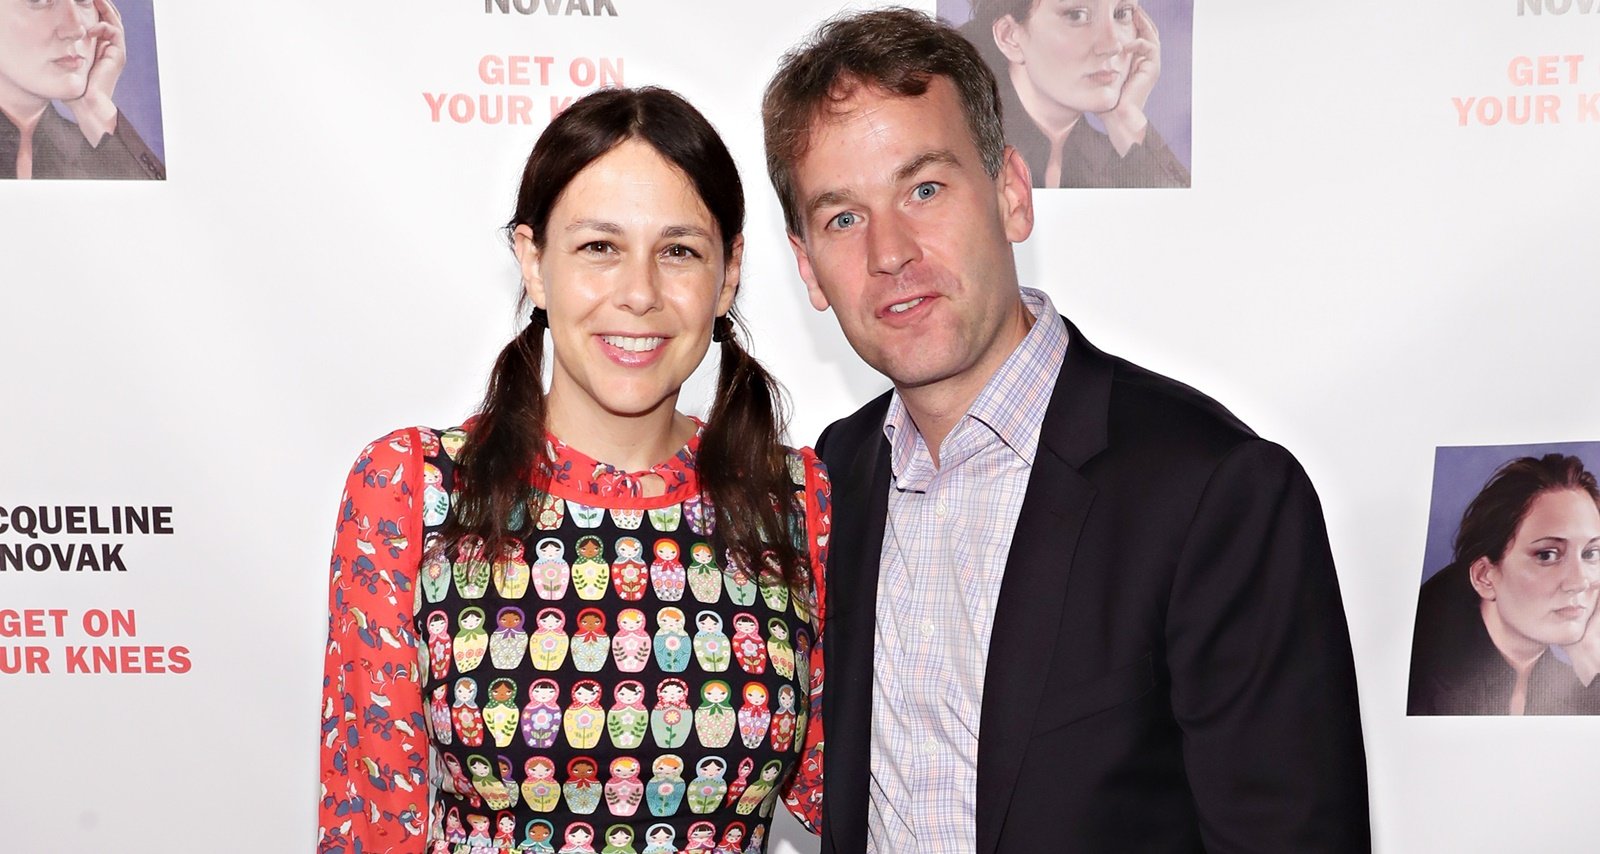 Mike Birbiglia’s Wife: Jen Stein Wiki, Family and Facts About the Poet and Producer